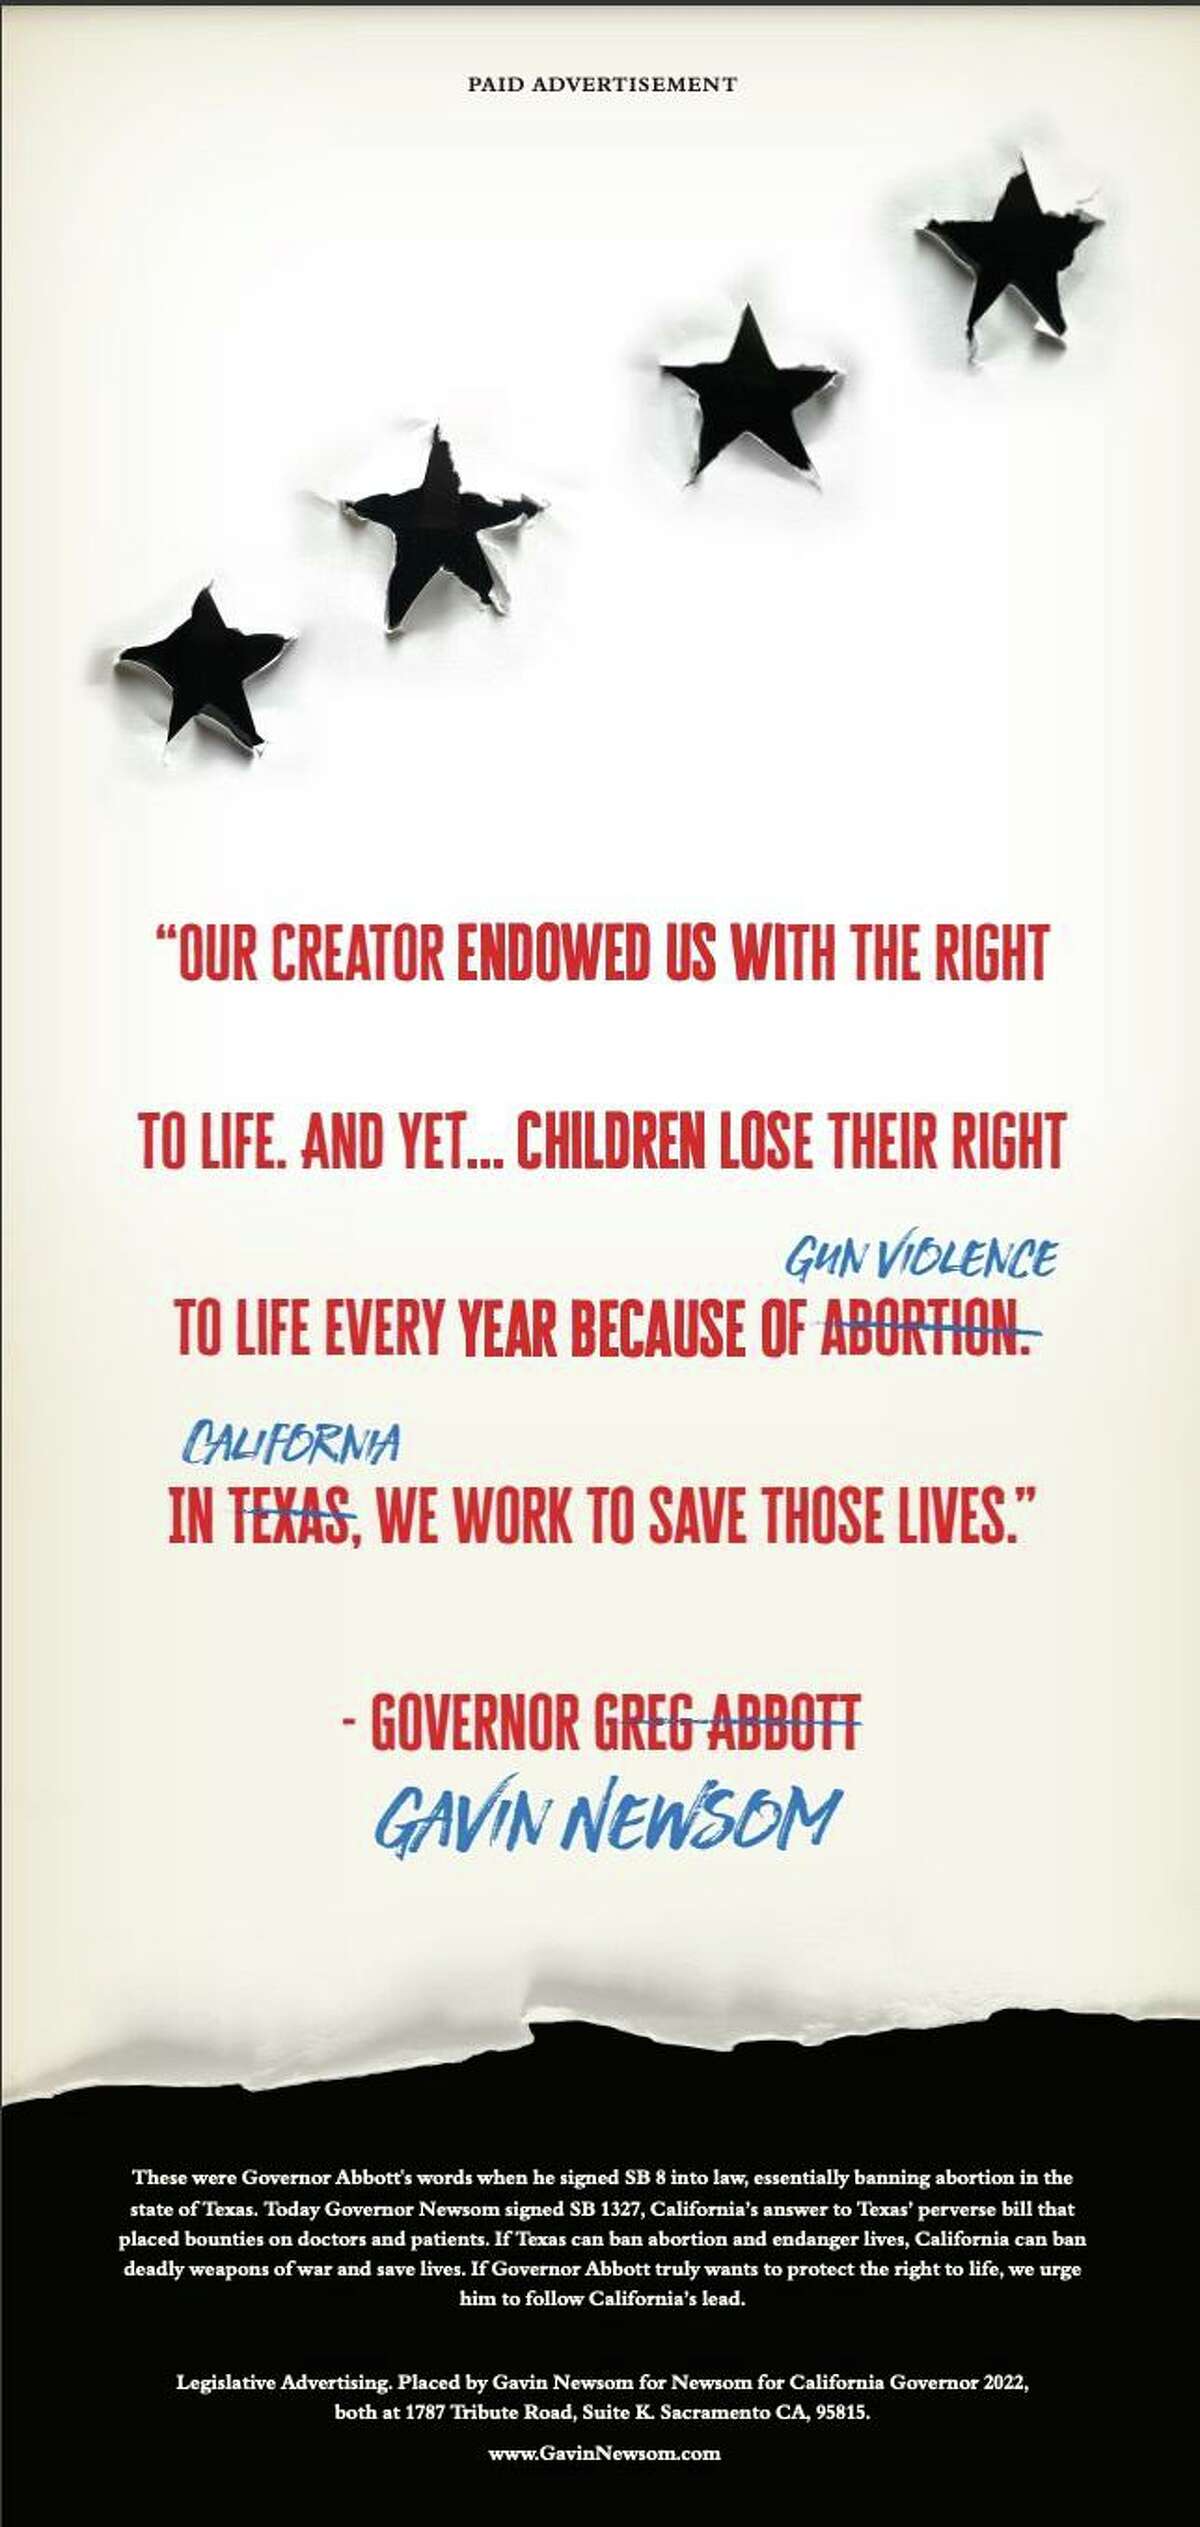 a poster that repurposes an anti-abortion statement to address about gun violence.